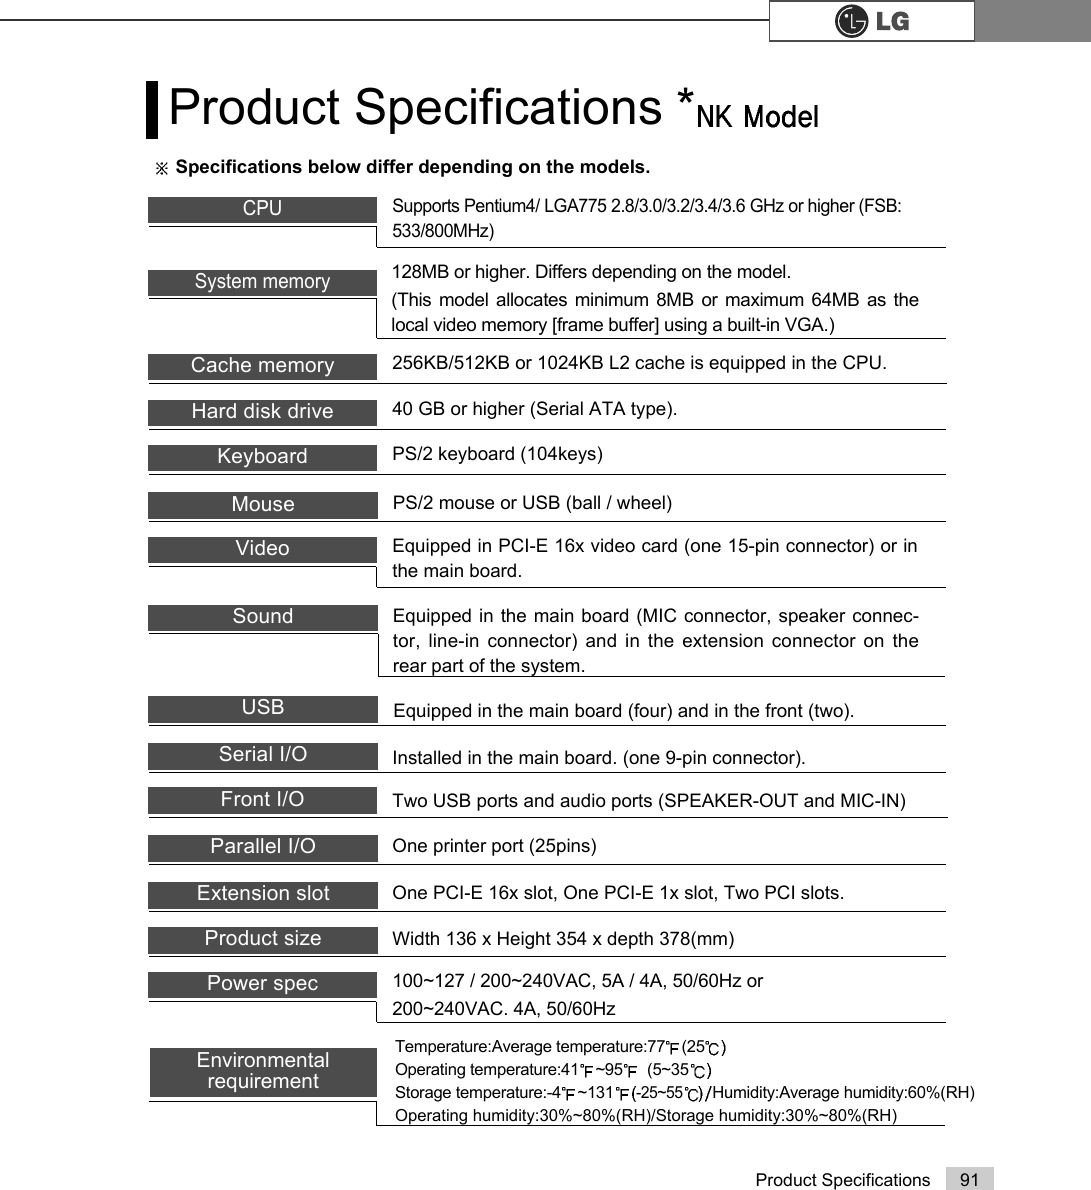 91Product SpecificationsProduct Specifications *Mouse PS/2 mouse or USB (ball / wheel)Sound Equipped in the main board (MIC connector, speaker connec-tor, line-in connector) and in the extension connector on therear part of the system.System memory128MB or higher. Differs depending on the model. (This model allocates minimum 8MB or maximum 64MB as thelocal video memory [frame buffer] using a built-in VGA.)USB Equipped in the main board (four) and in the front (two).Serial I/O Installed in the main board. (one 9-pin connector).Parallel I/O One printer port (25pins)Extension slot One PCI-E 16x slot, One PCI-E 1x slot, Two PCI slots.Product size Width 136 x Height 354 x depth 378(mm)Power spec 100~127 / 200~240VAC, 5A / 4A, 50/60Hz or200~240VAC. 4A, 50/60HzFront I/O Two USB ports and audio ports (SPEAKER-OUT and MIC-IN)Video Equipped in PCI-E 16x video card (one 15-pin connector) or inthe main board.Keyboard PS/2 keyboard (104keys)Hard disk drive 40 GB or higher (Serial ATA type).Cache memory 256KB/512KB or 1024KB L2 cache is equipped in the CPU. CPUSupports Pentium4/ LGA775 2.8/3.0/3.2/3.4/3.6 GHz or higher (FSB:533/800MHz)Temperature:Average temperature:77 (25Operating temperature:41 ~95 (5~35Storage temperature:-4 ~131-25~55Humidity:Average humidity:60%(RH) Operating humidity:30%~80%(RH)/Storage humidity:30%~80%(RH)Environmental requirementSpecifications below differ depending on the models.